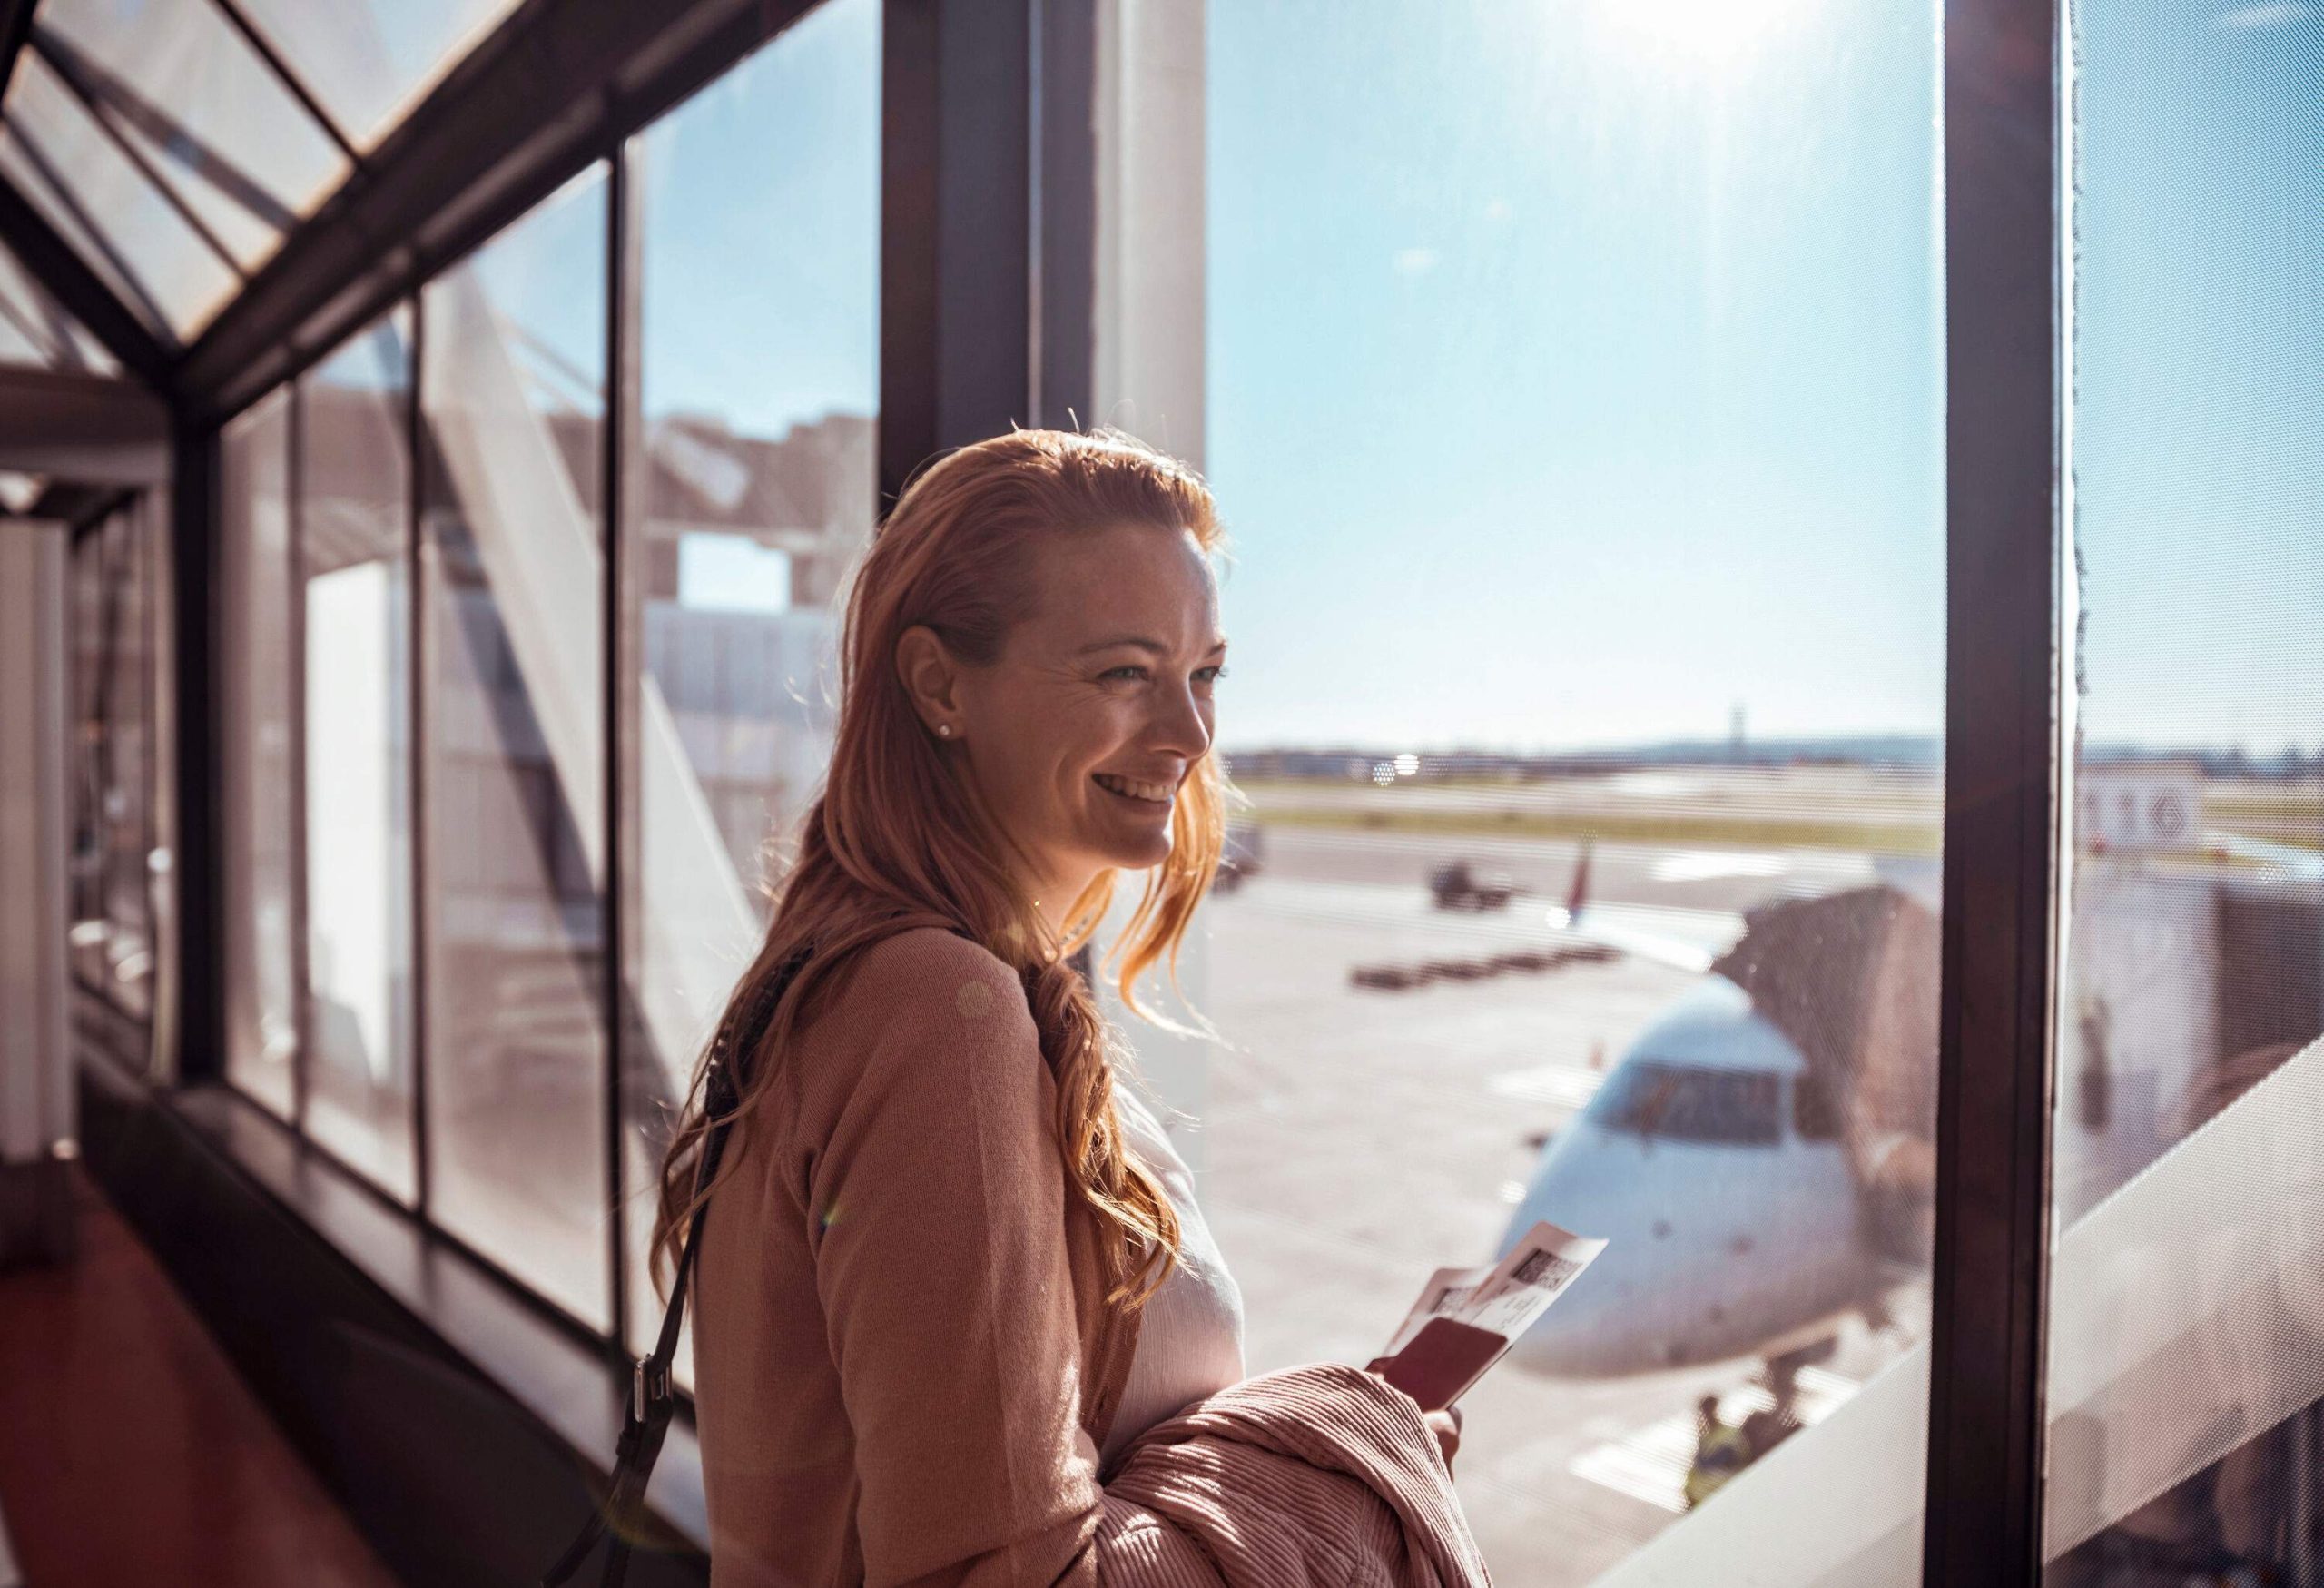 A woman smiles as she stands beside the big glass windows of an airport terminal while holding her ticket.